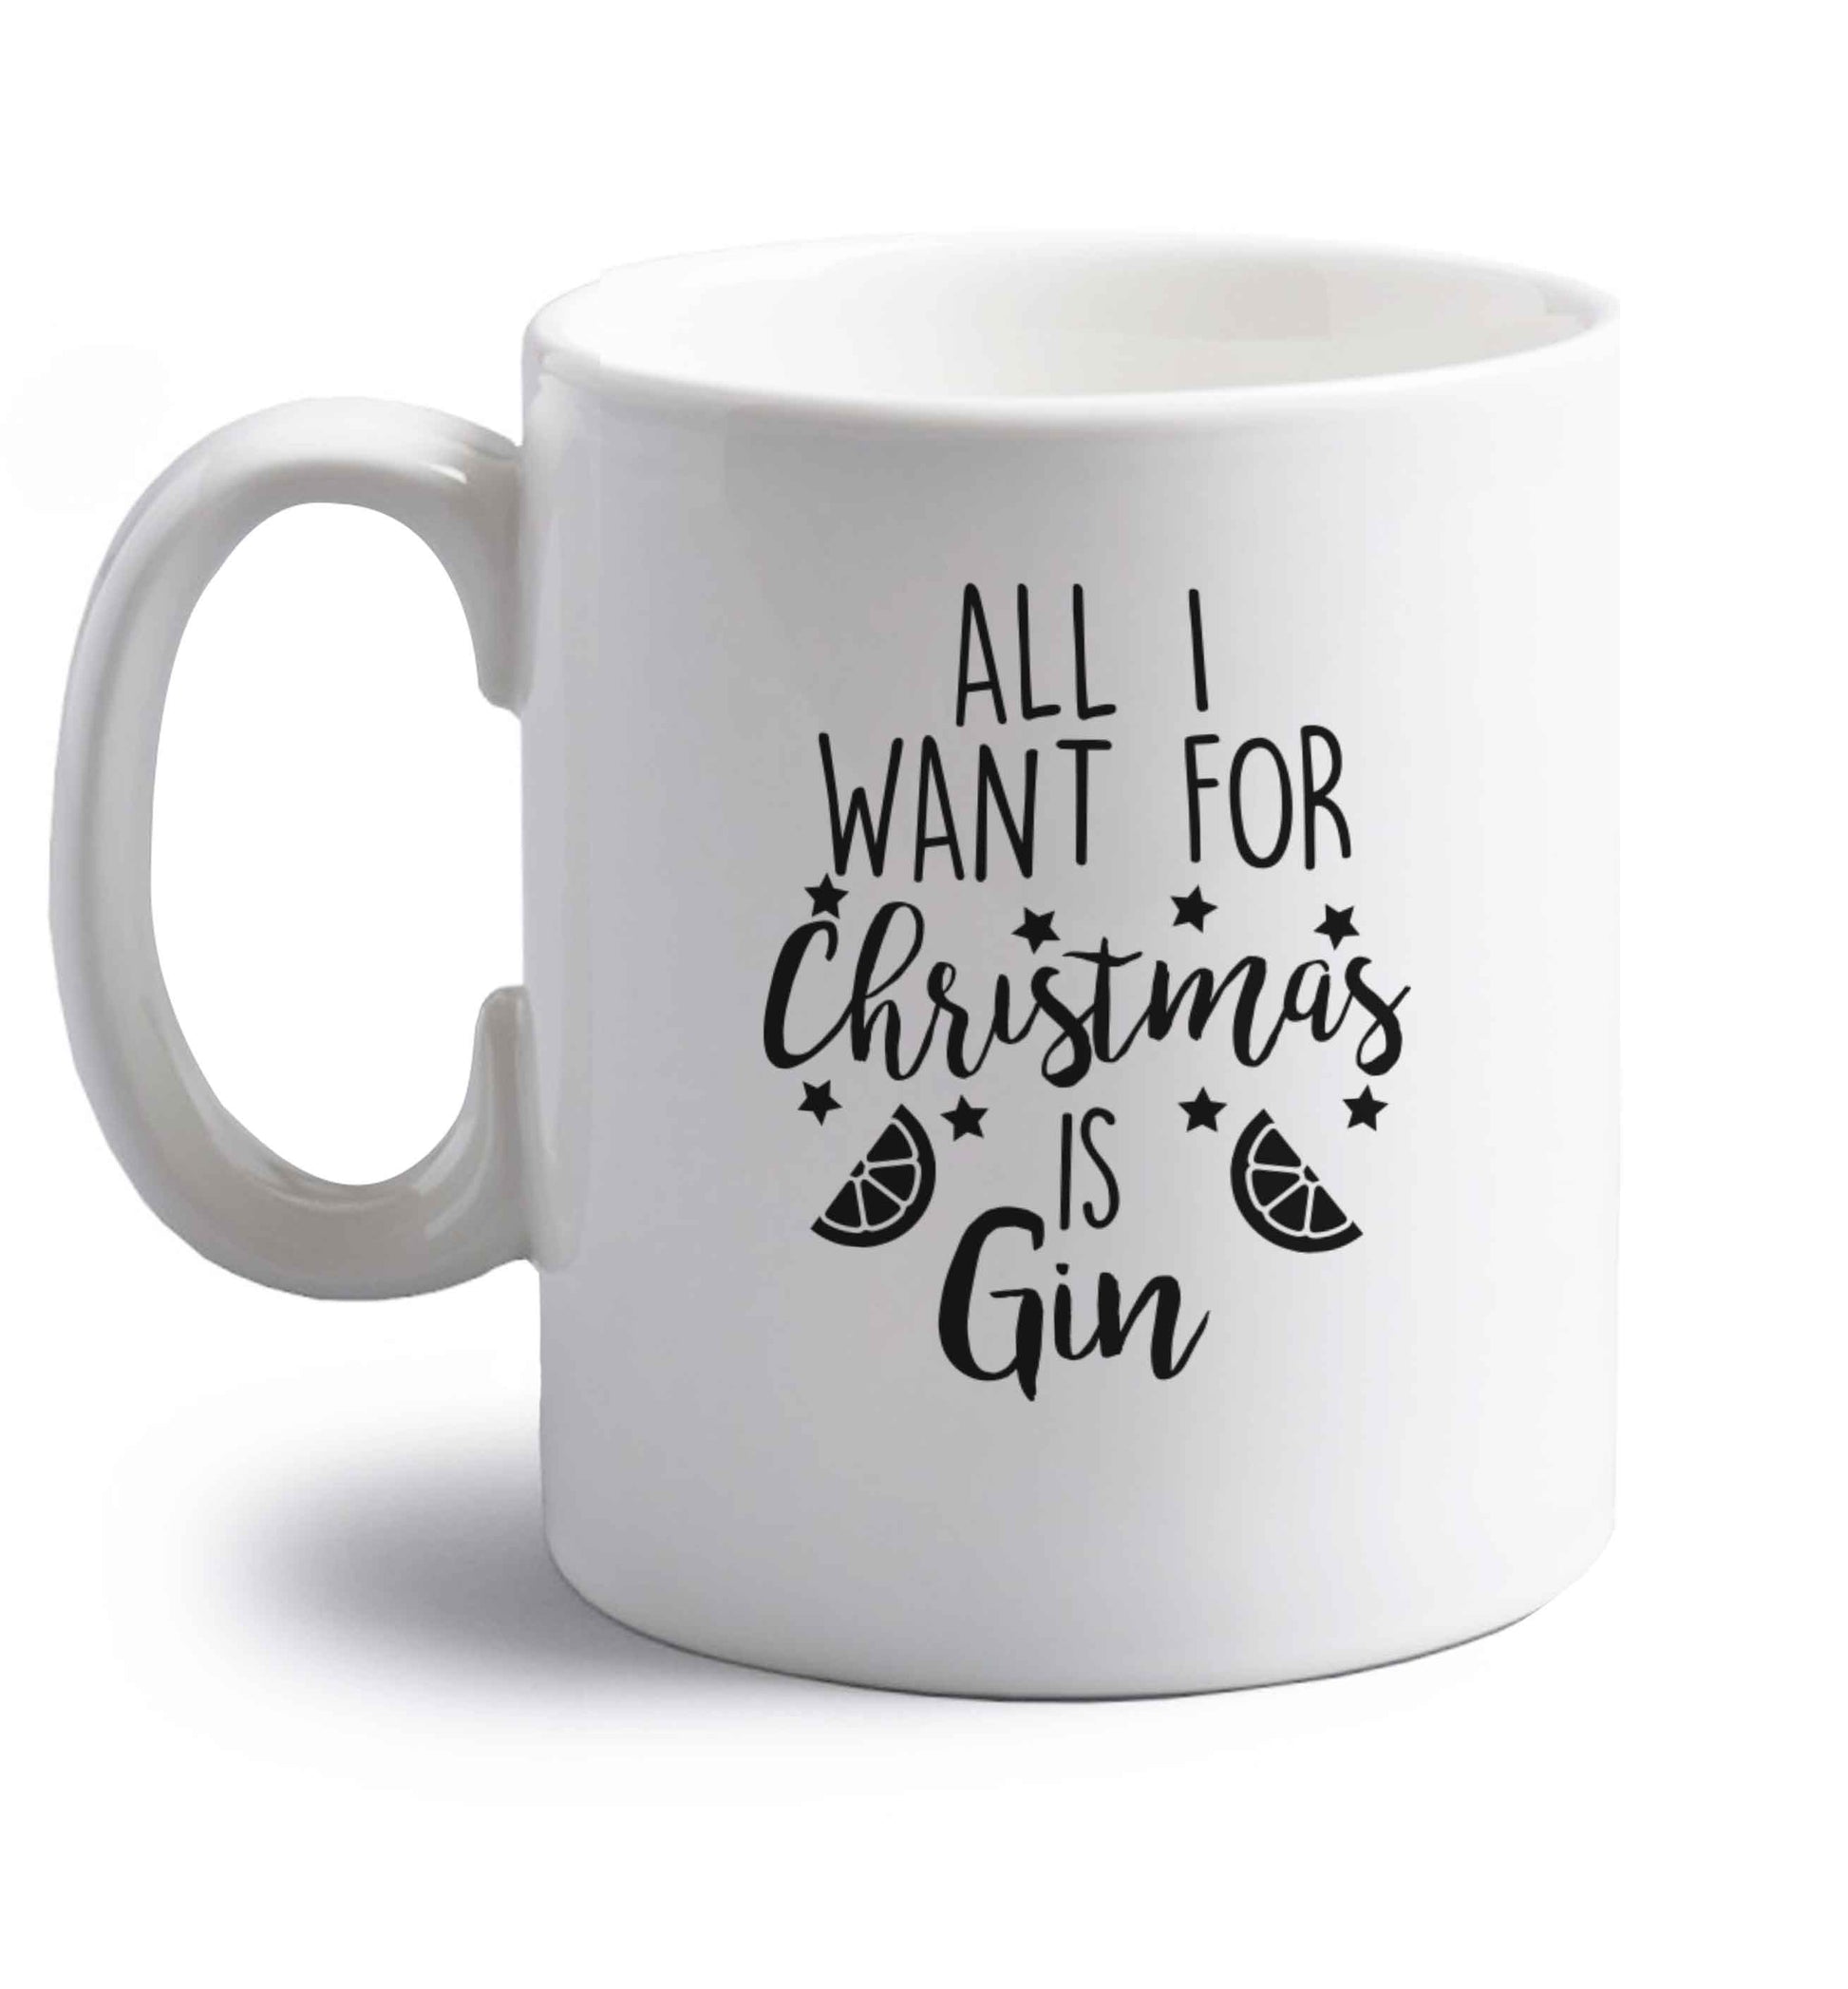 All I want for Christmas is gin right handed white ceramic mug 